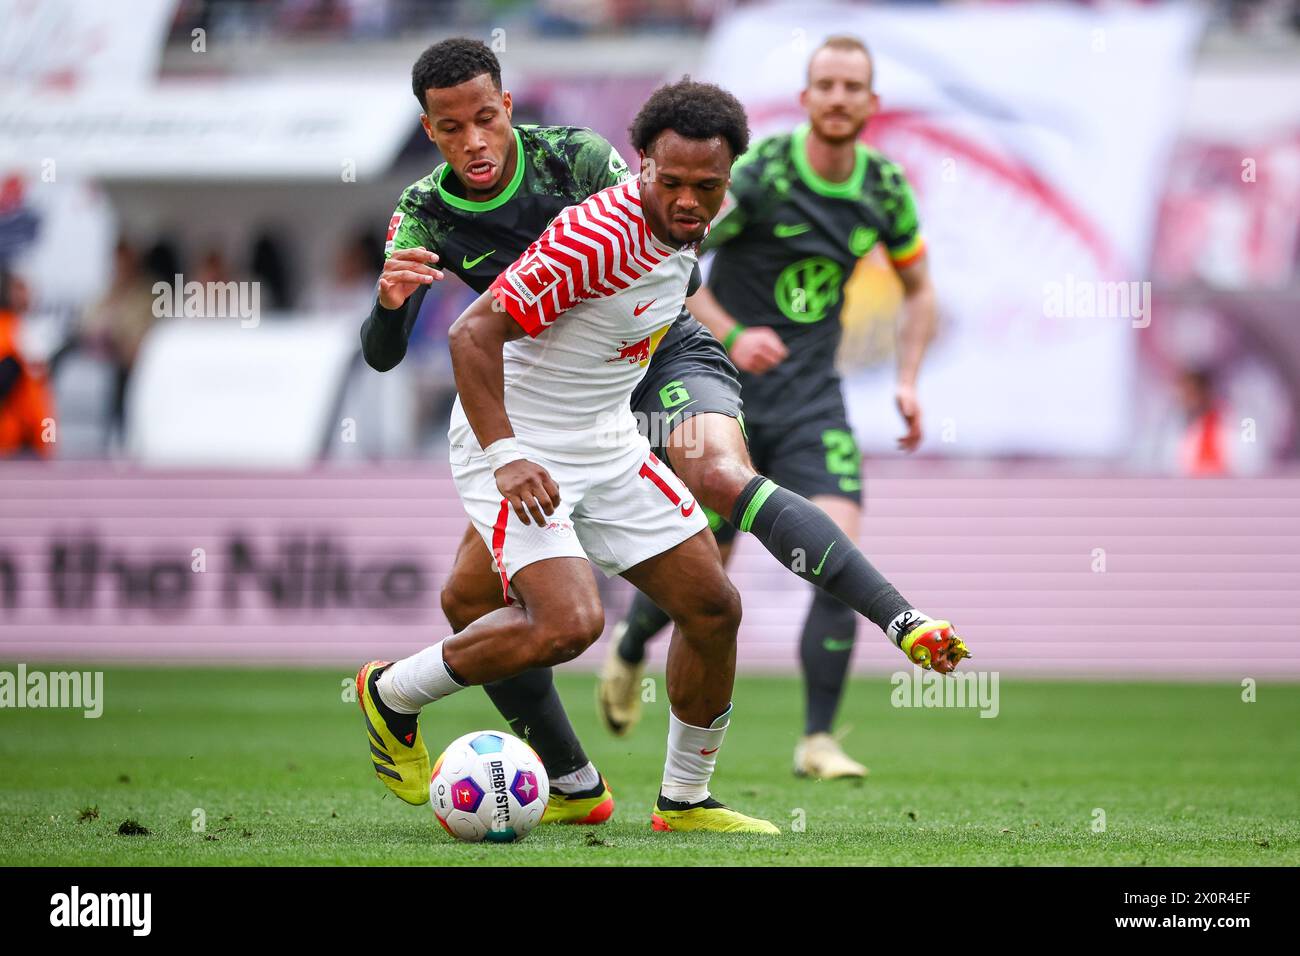 Leipzig, Germany. 13th Apr, 2024. Soccer: Bundesliga, RB Leipzig - VfL Wolfsburg, matchday 29 at the Red Bull Arena. Leipzig's player Lois Openda (v) and Wolfsburg's Aster Vranckx in a duel. Credit: Jan Woitas/dpa - IMPORTANT NOTE: In accordance with the regulations of the DFL German Football League and the DFB German Football Association, it is prohibited to utilize or have utilized photographs taken in the stadium and/or of the match in the form of sequential images and/or video-like photo series./dpa/Alamy Live News Stock Photo